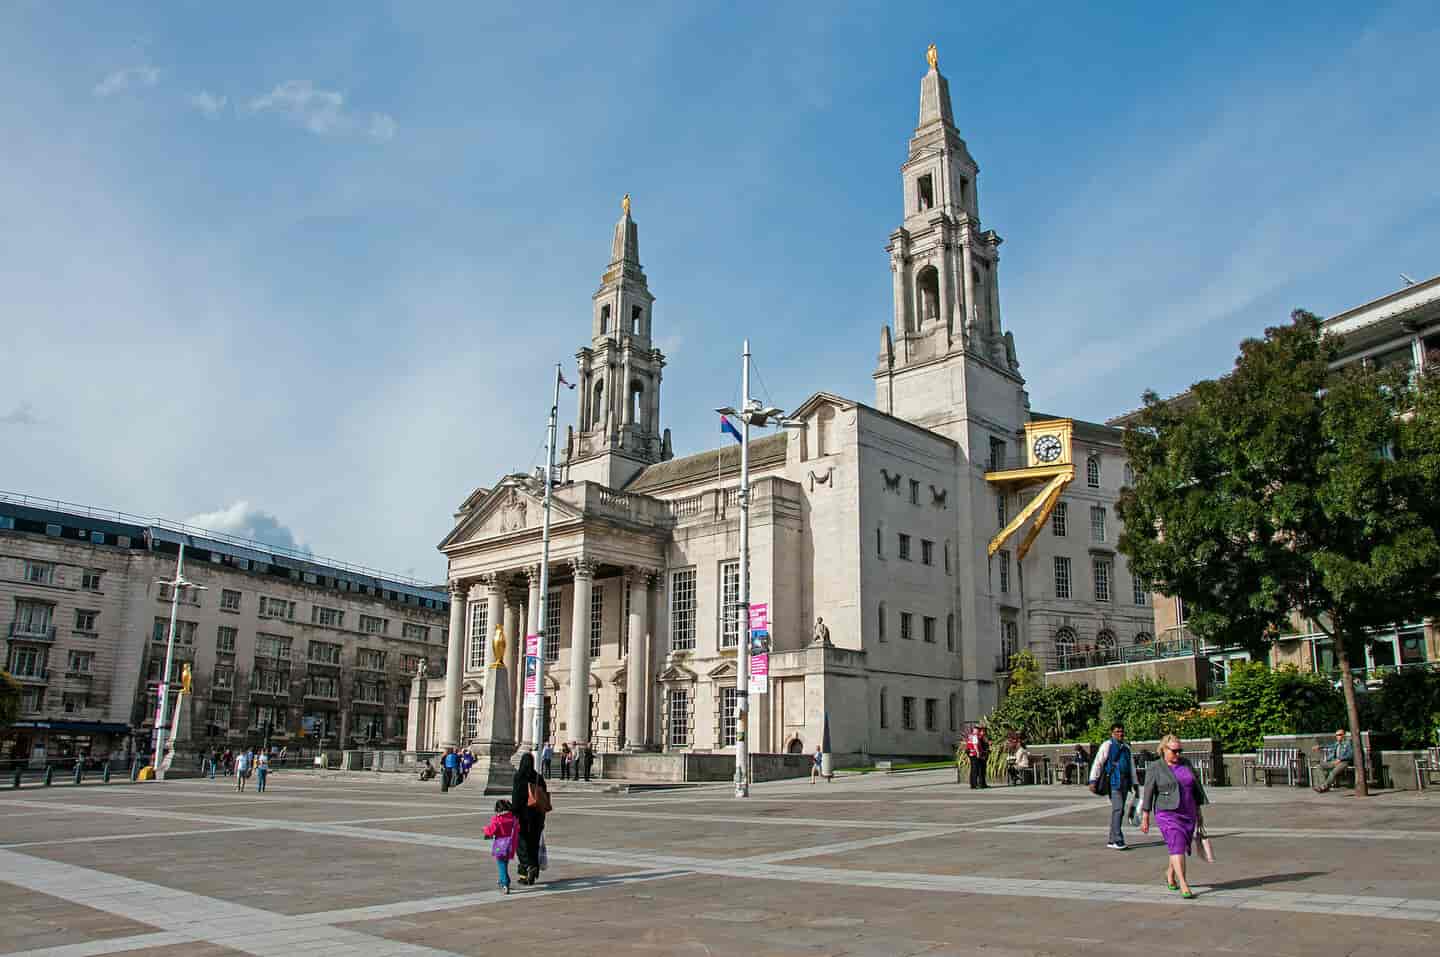 Student Accommodation in Leeds - Historic architecture Civic Hall in Millennium Square on a sunny day